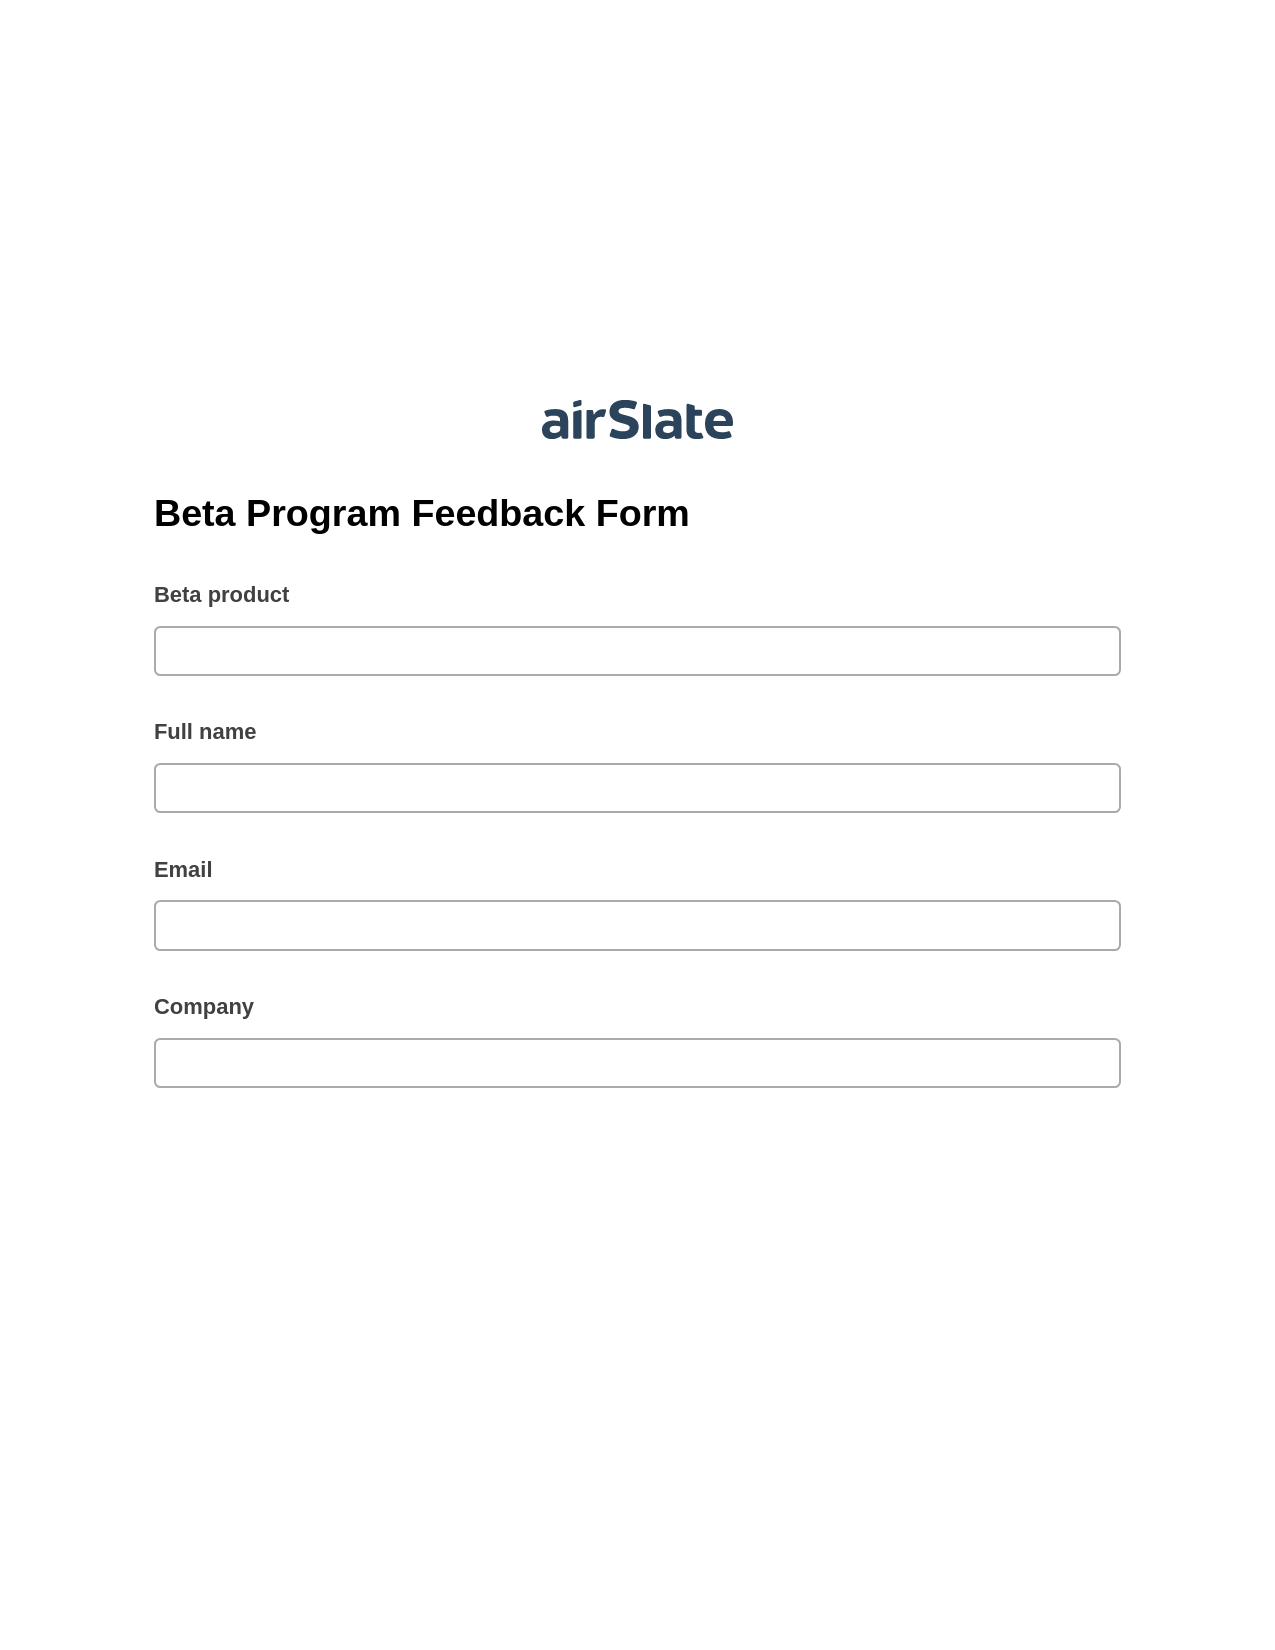 Multirole Beta Program Feedback Form Pre-fill from another Slate Bot, Add Tags to Slate Bot, Export to MySQL Bot